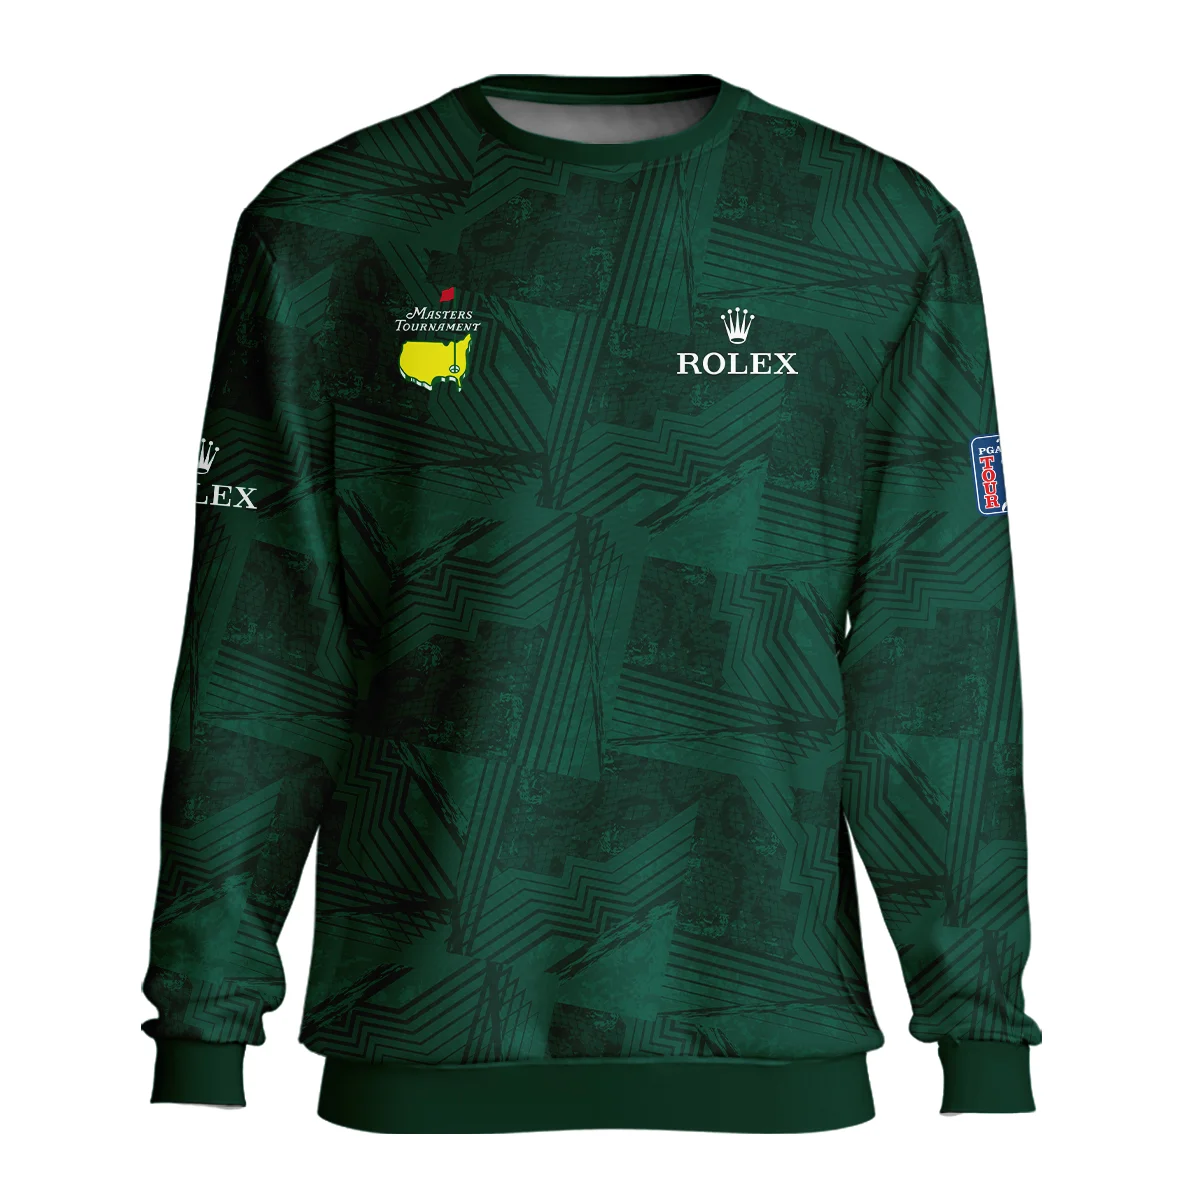 Masters Tournament Rolex Sublimation Sports Dark Green Hoodie Shirt Style Classic Hoodie Shirt